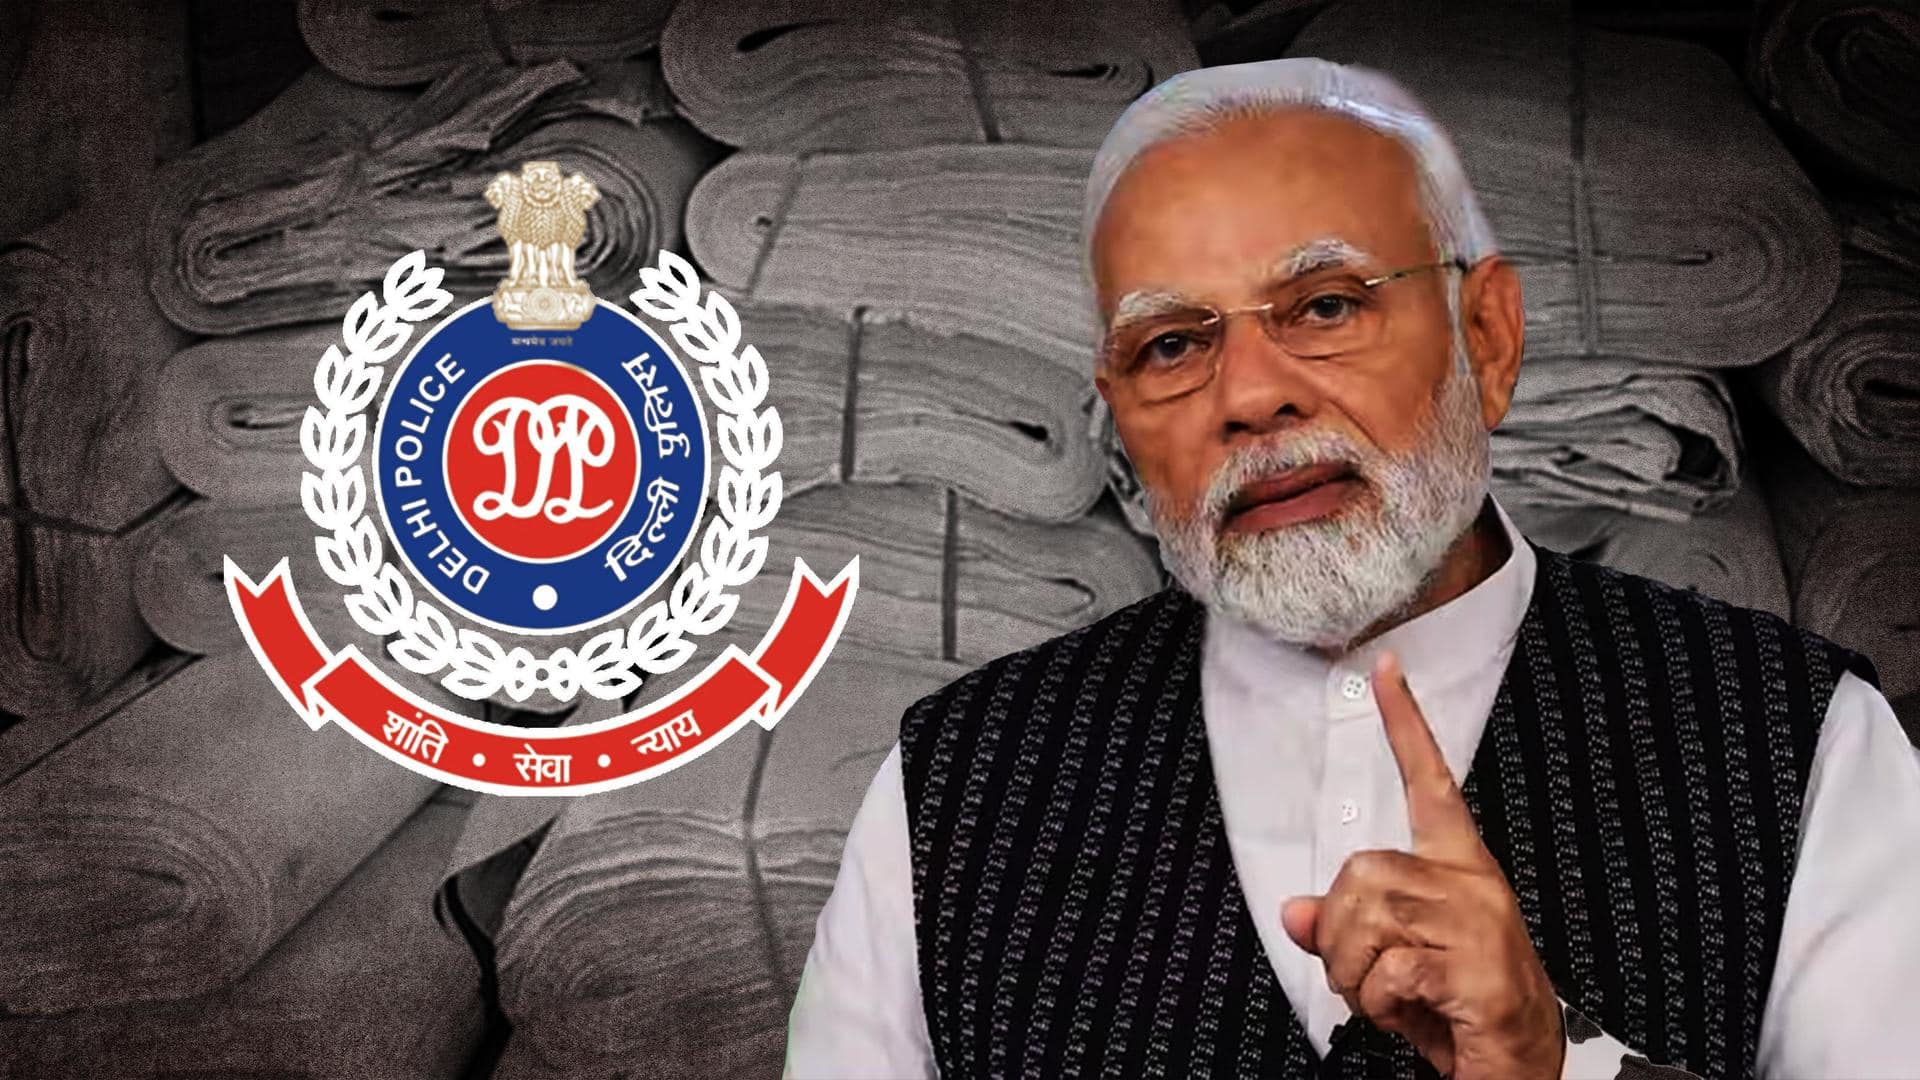 6 arrests, 100 FIRs over 'Modi hatao, desh bachao' posters